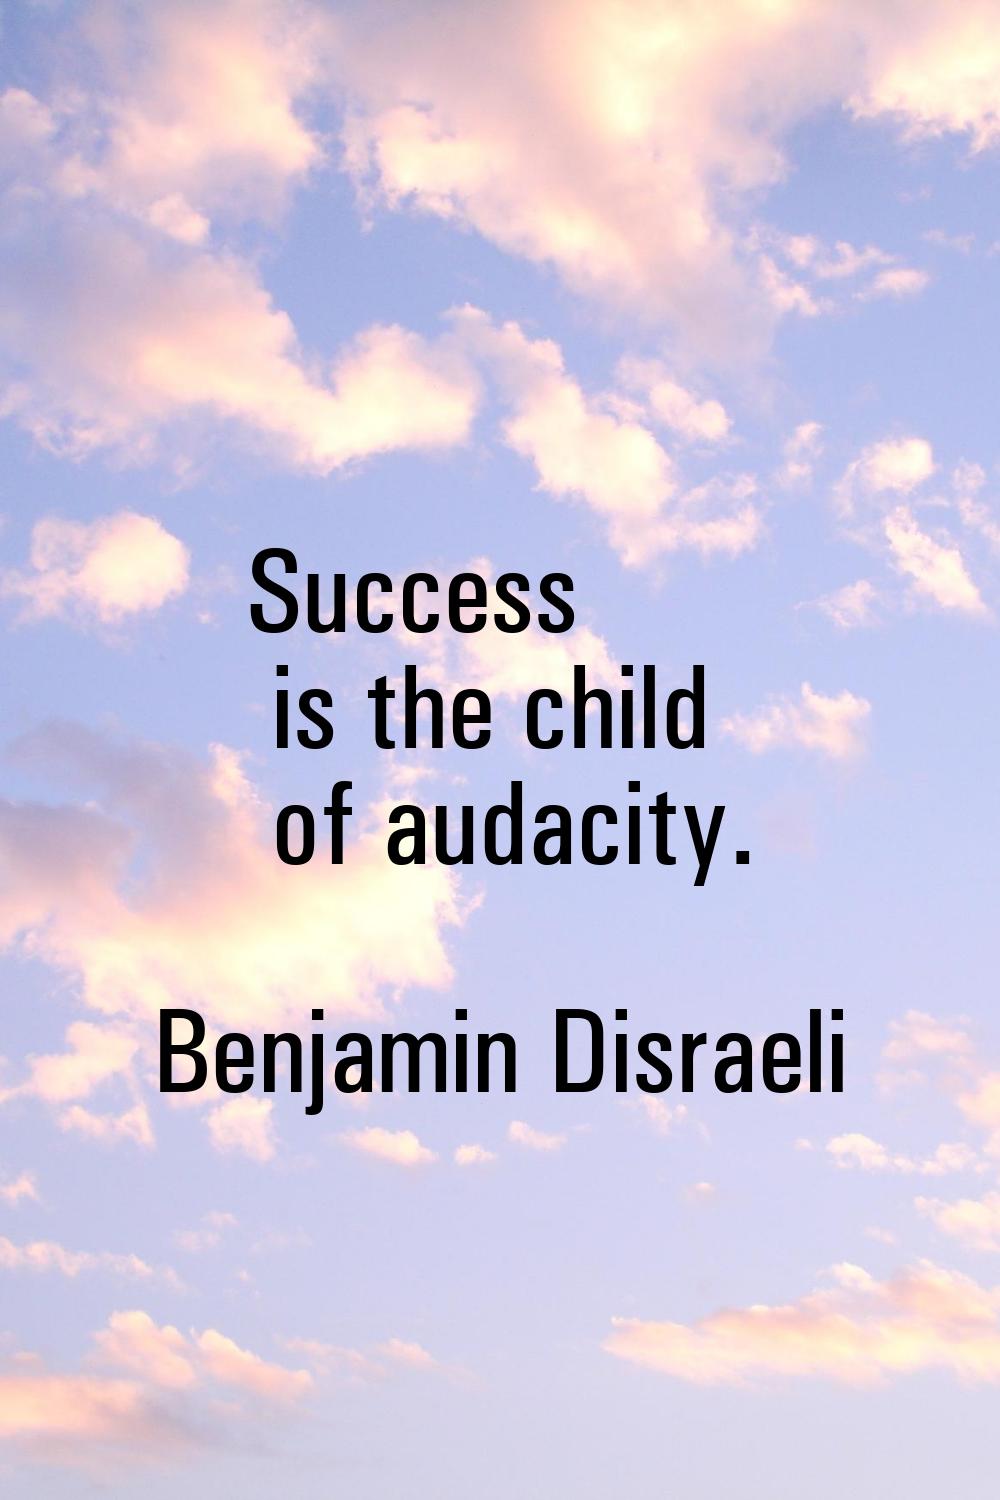 Success is the child of audacity.